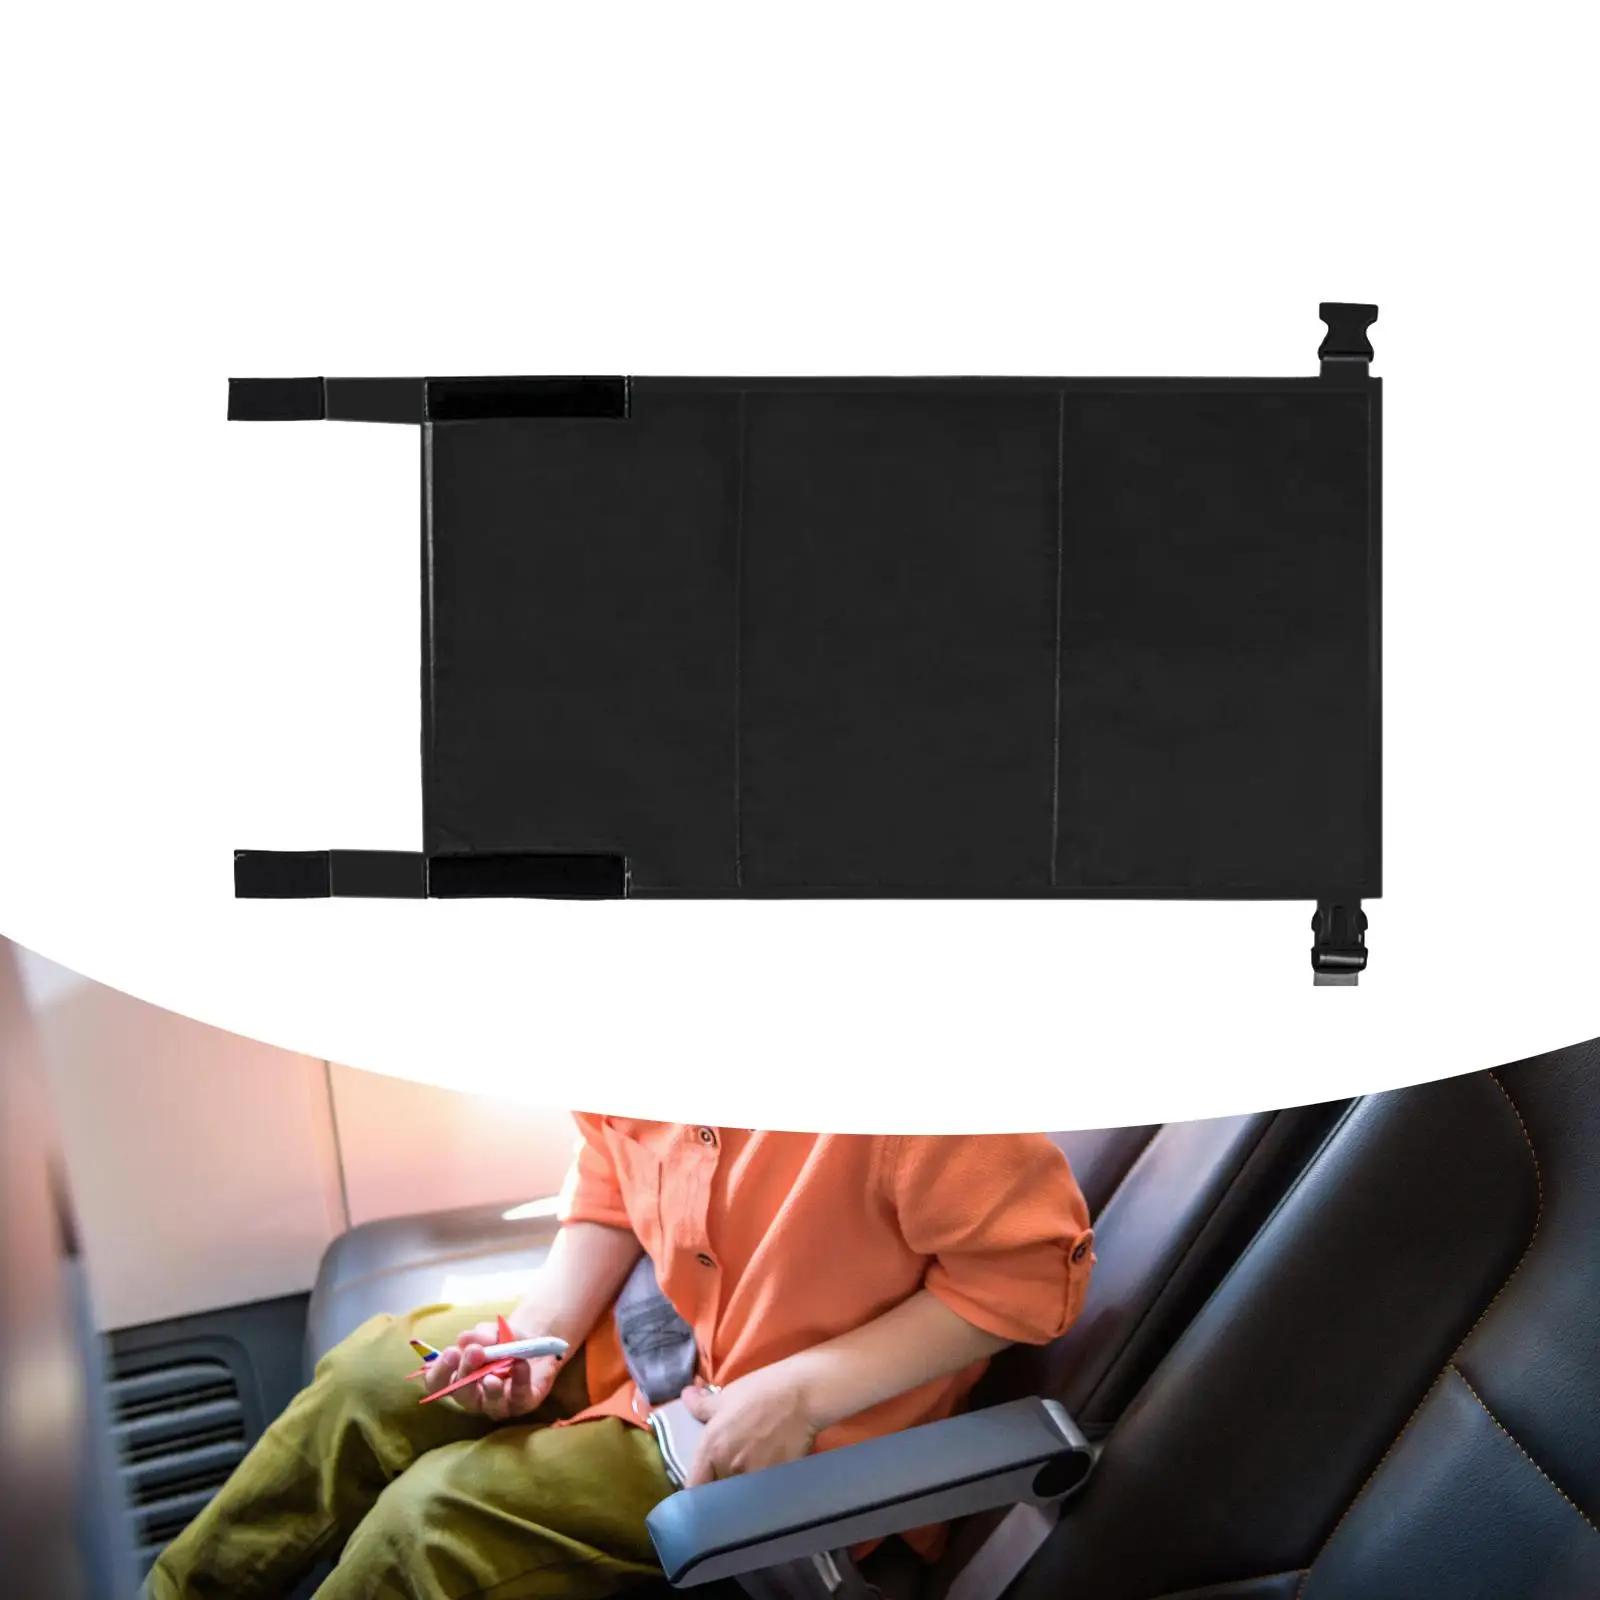 Airplane Seat Extender Compact for Kids to Lie Down on Plane Adjustable Seat Cover Kids Airplane Footrest Airplane Foot Hammock